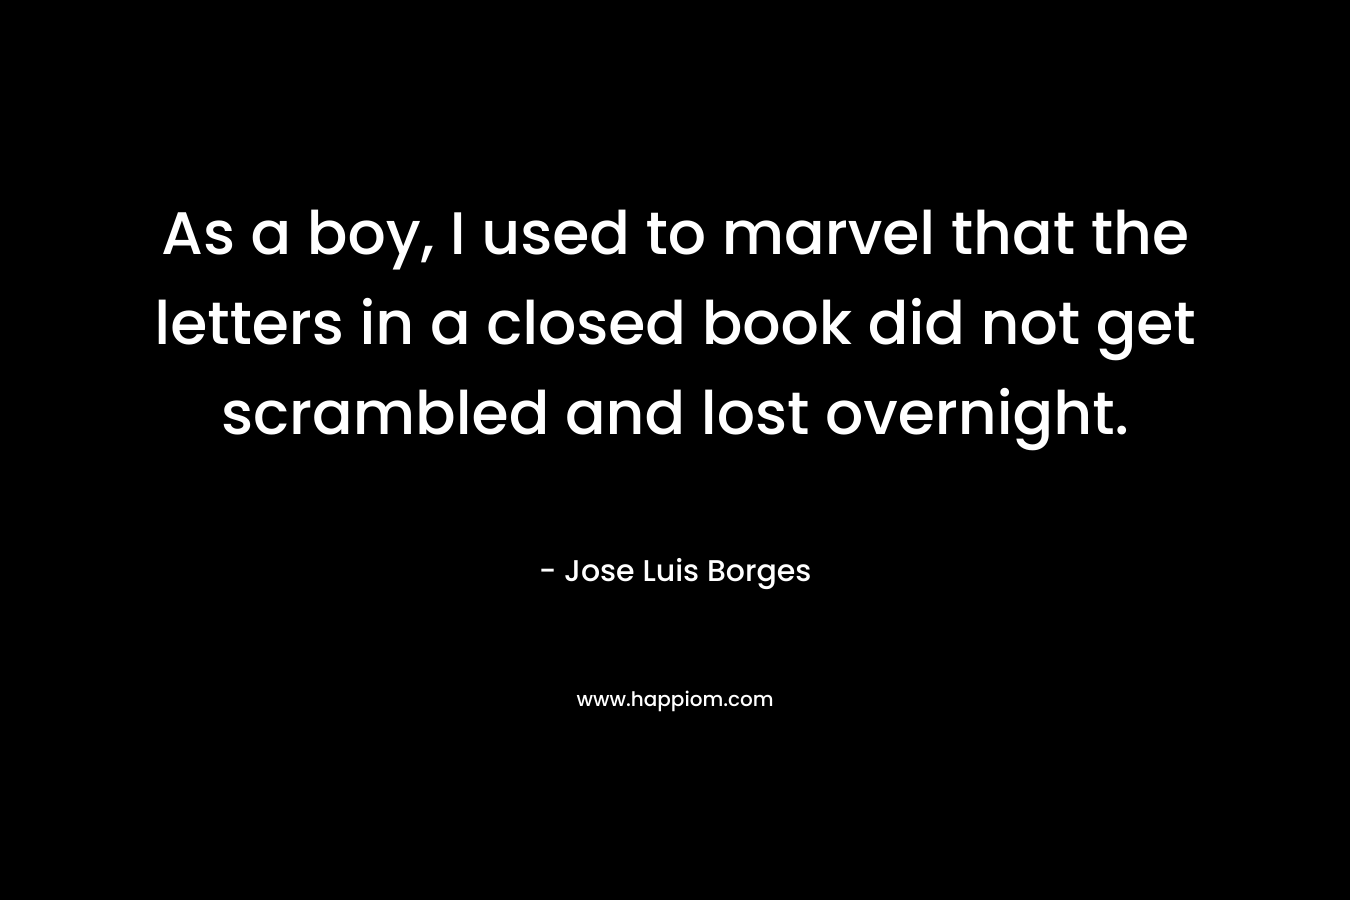 As a boy, I used to marvel that the letters in a closed book did not get scrambled and lost overnight. – Jose Luis Borges